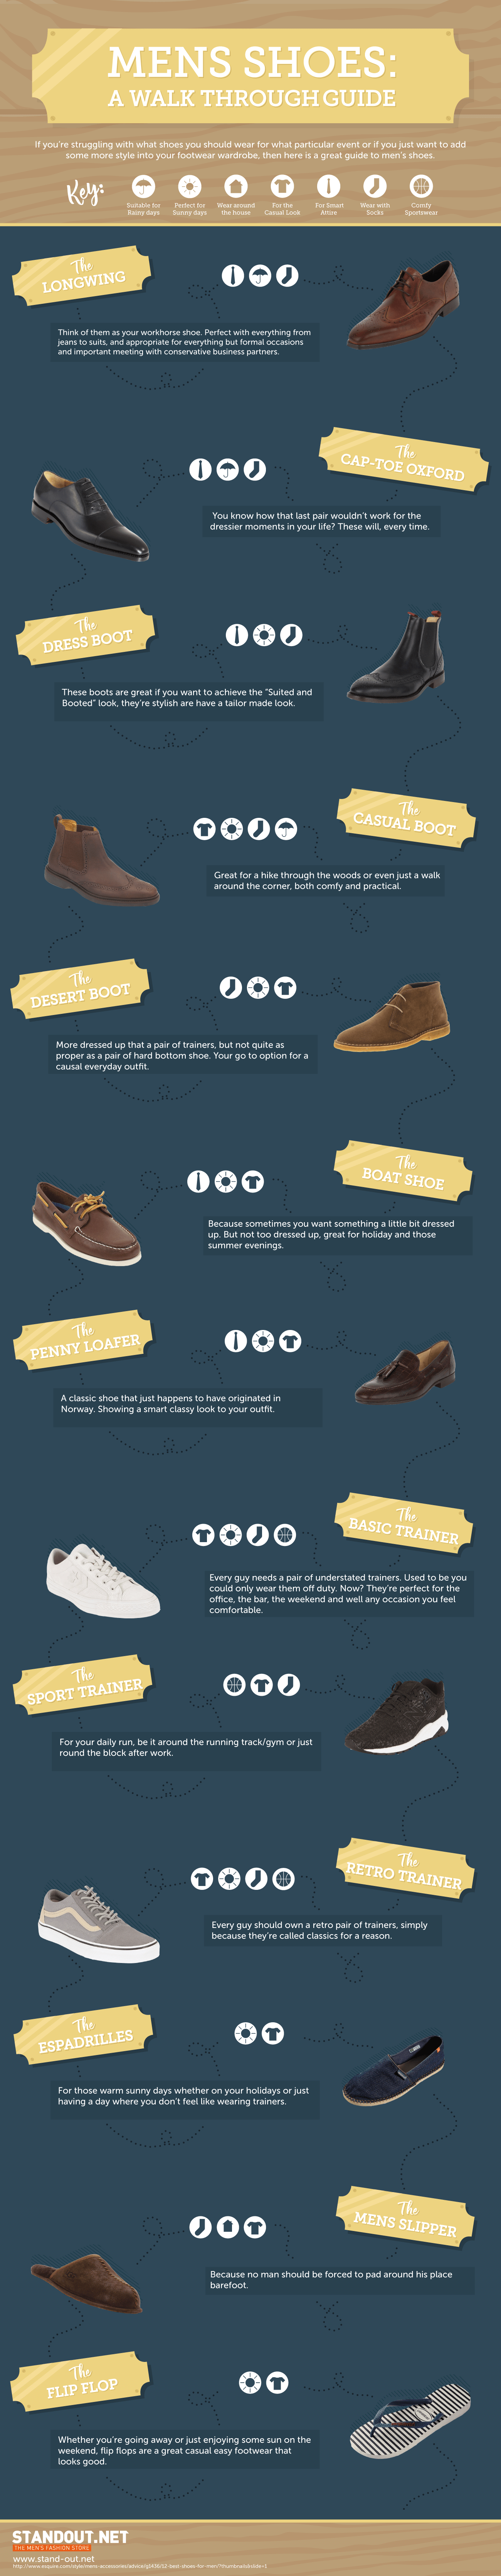 Guide-to-Mens-Shoes-min